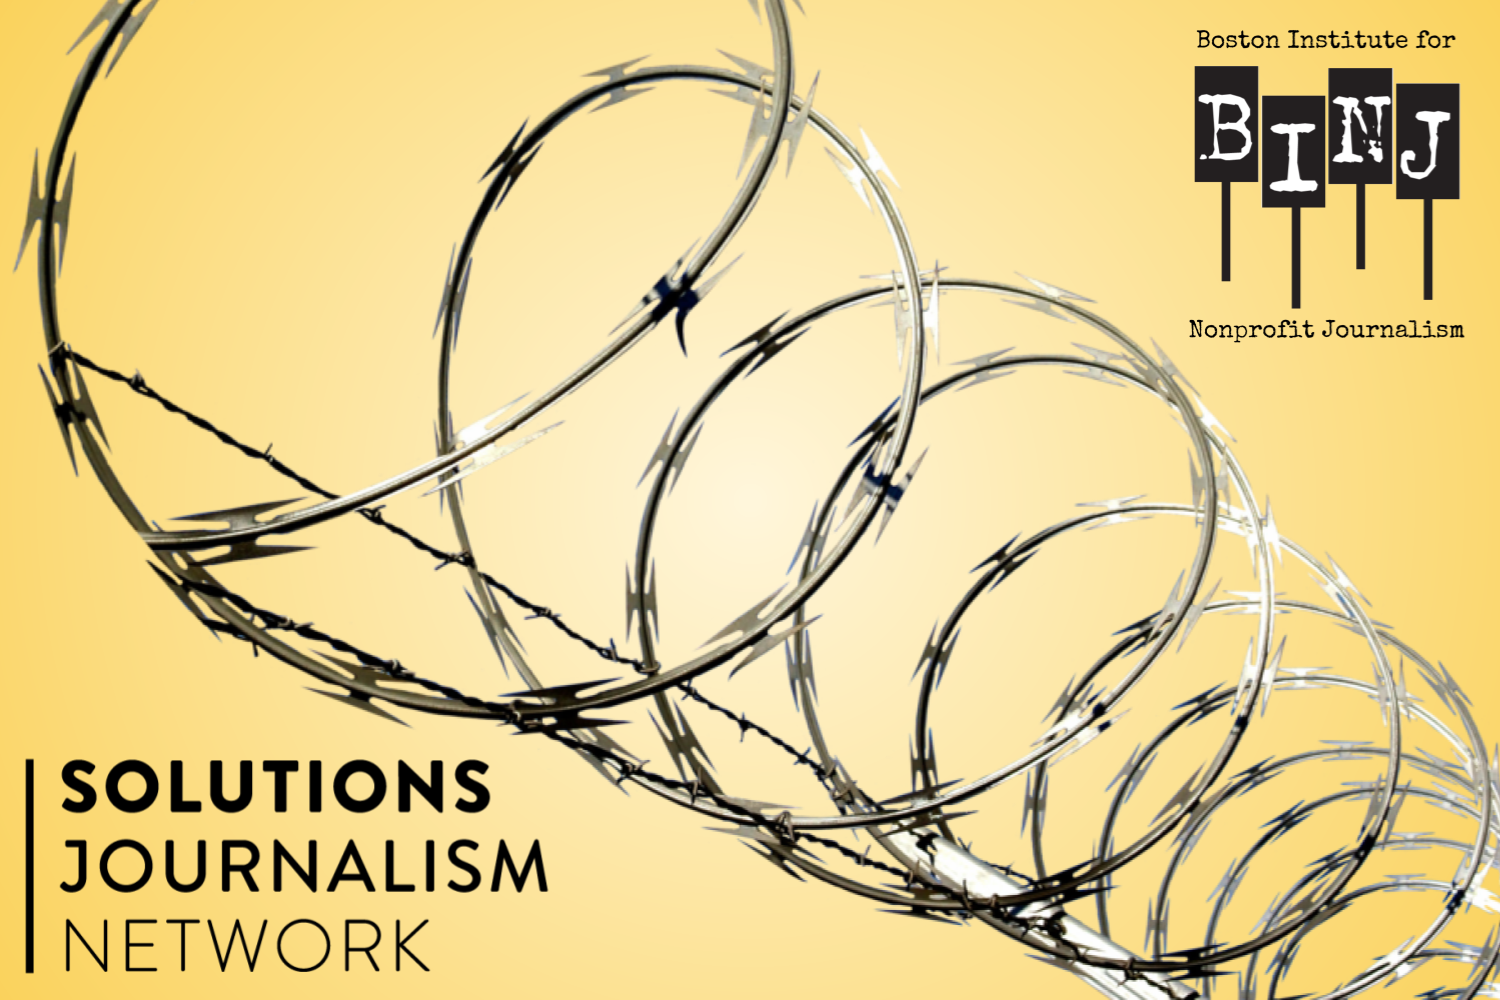 BINJ SELECTED FOR SOLUTIONS JOURNALISM NETWORK ‘RENEWING DEMOCRACY’ GRANT, EXPANDS SCOPE OF PRISON & PAROLE REPORTING